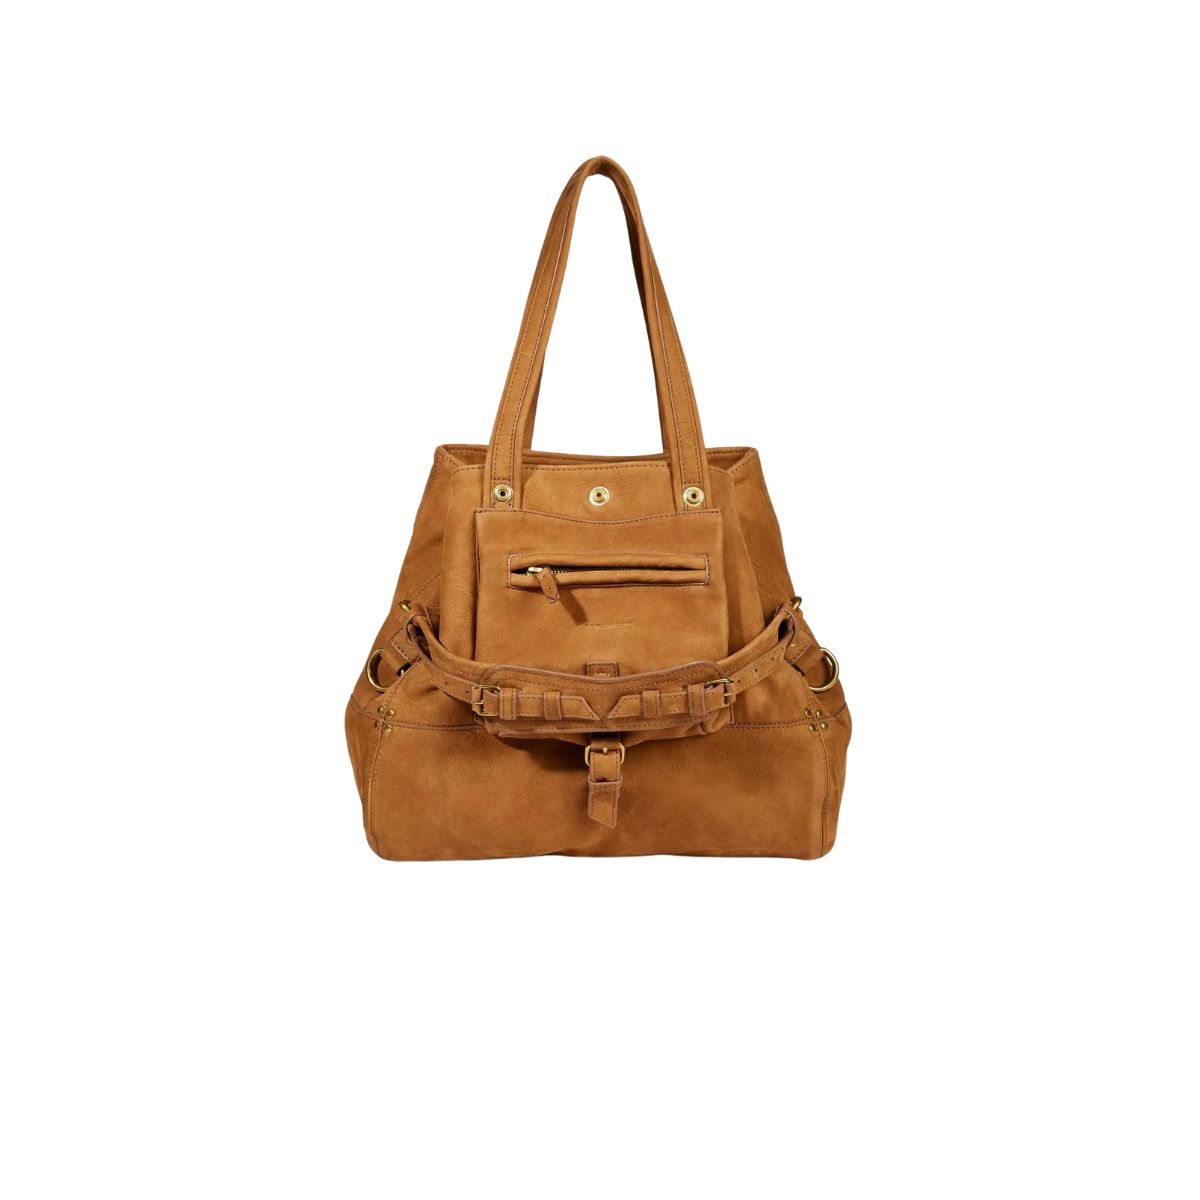 Jerome Dreyfuss Billy M Tote in Tabac Taurillion